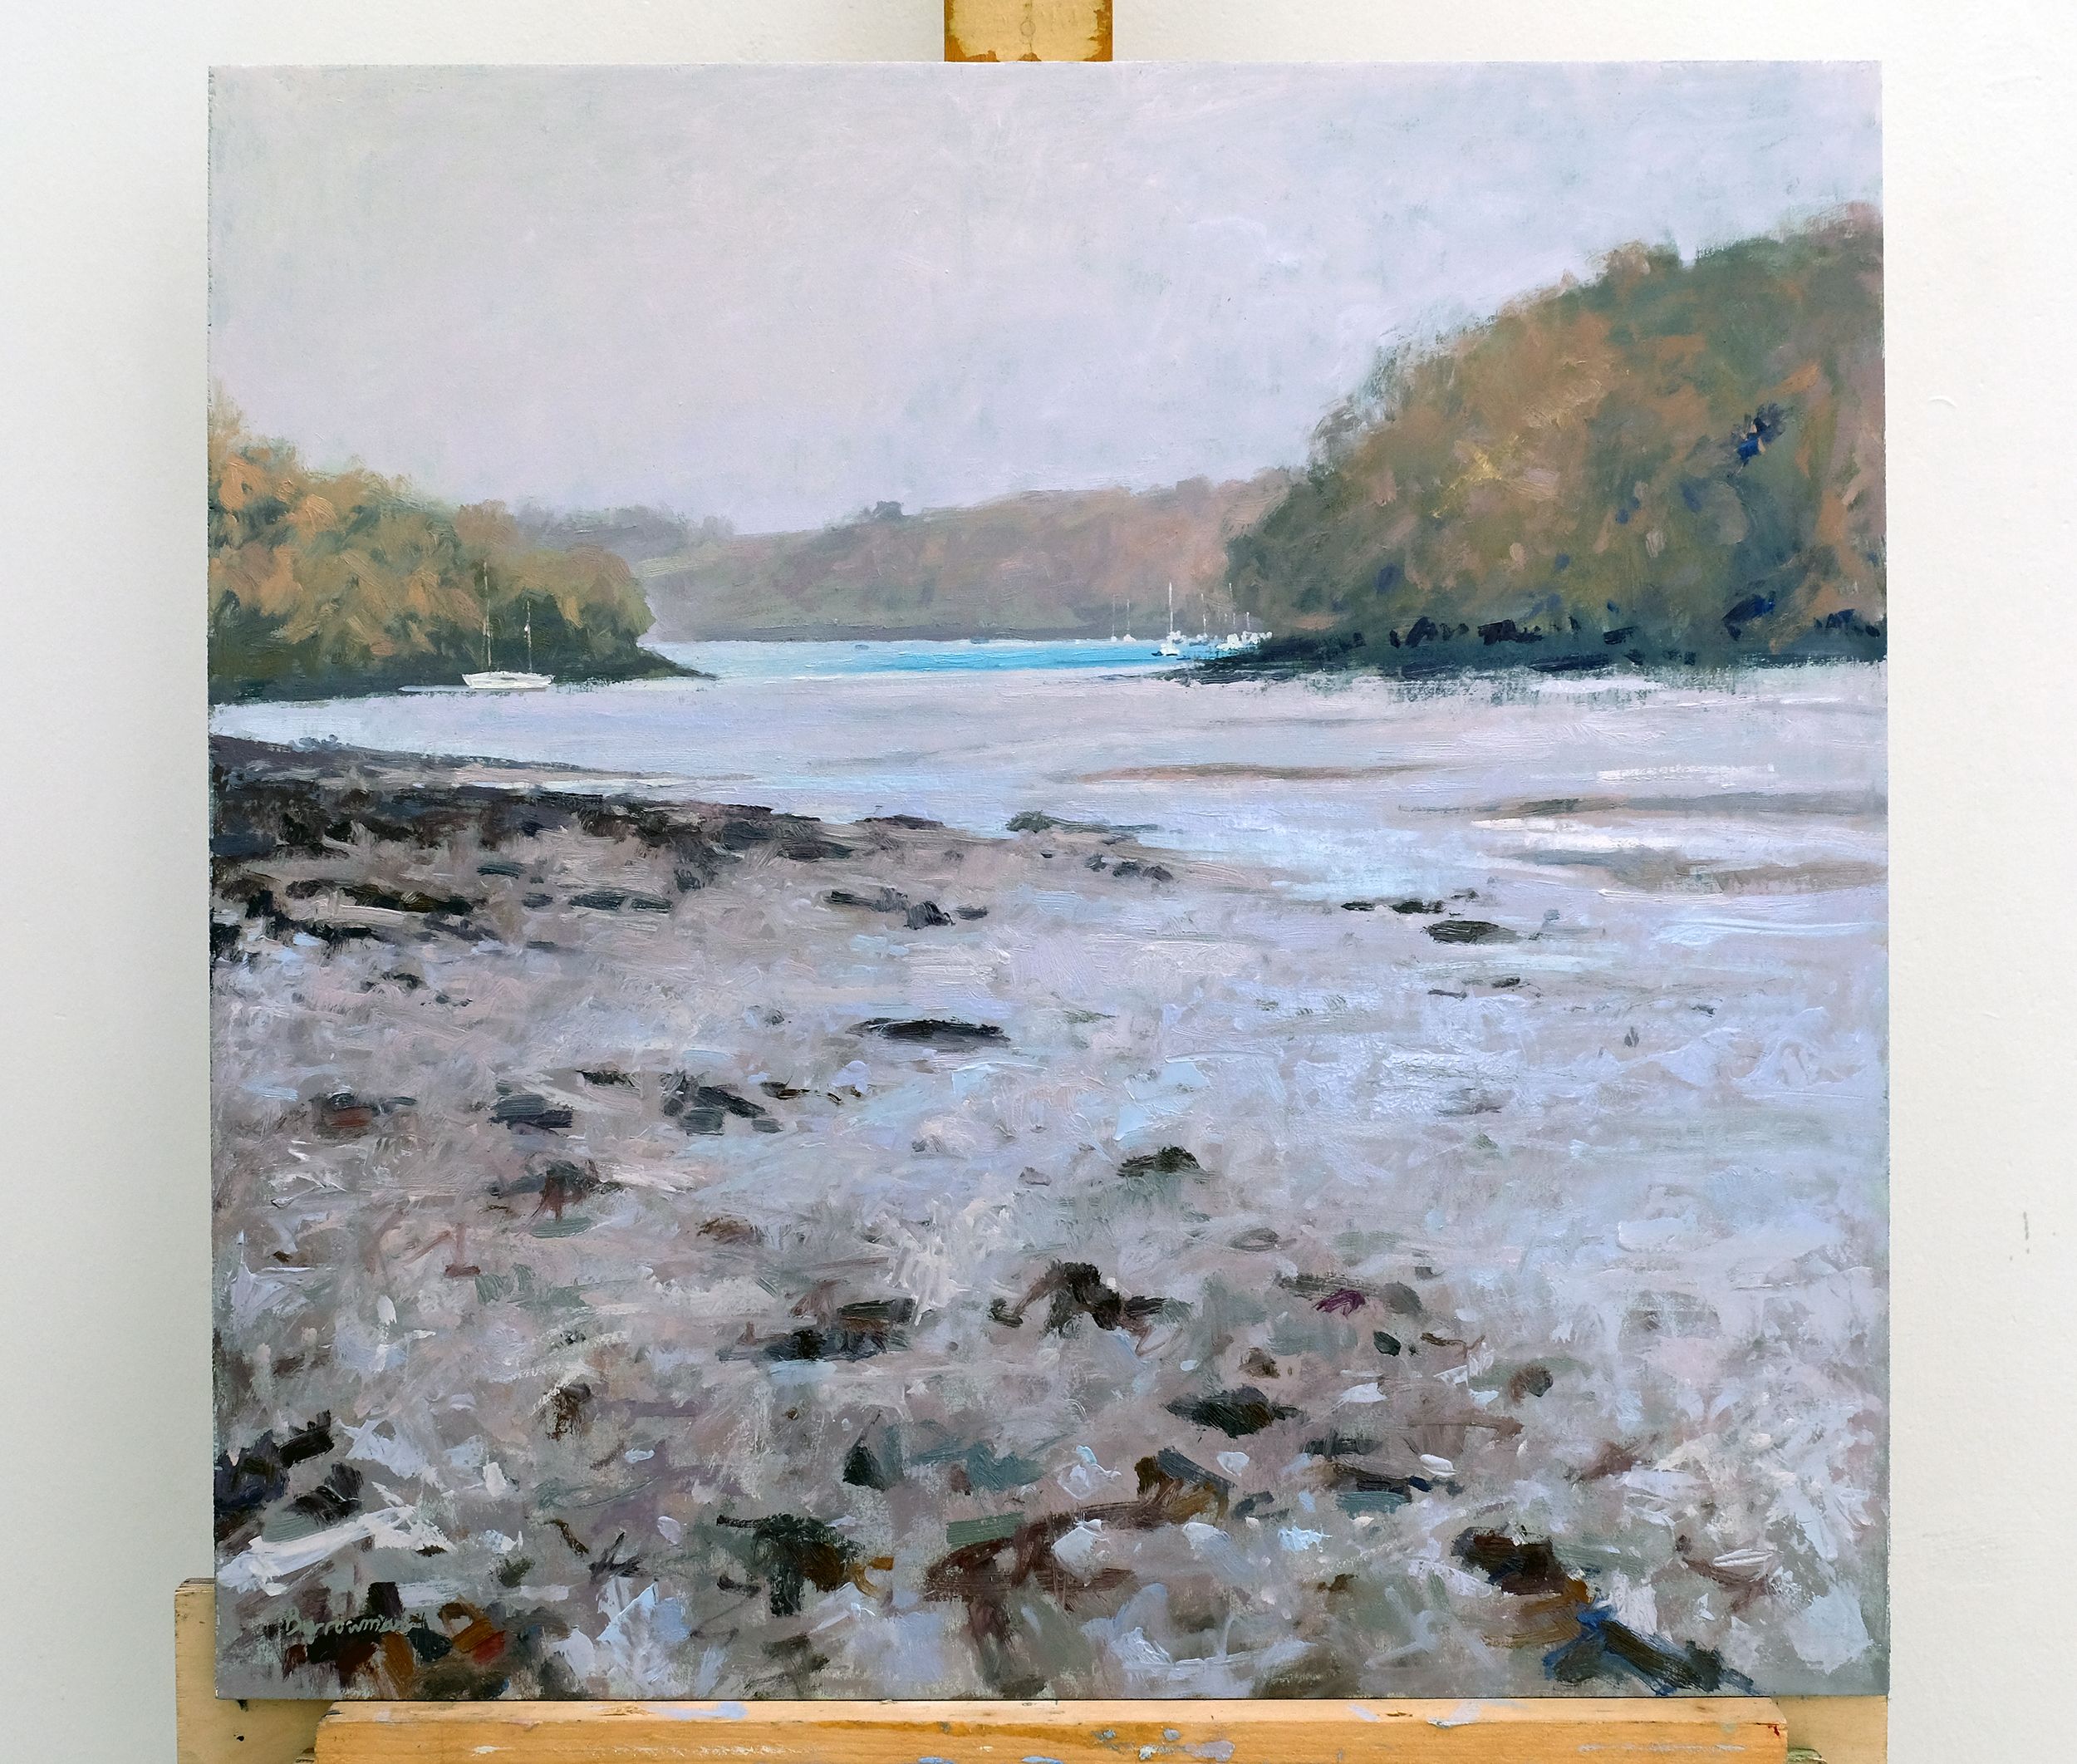 Ebbing tide, Lamouth Creek by Andrew Barrowman - Secondary Image